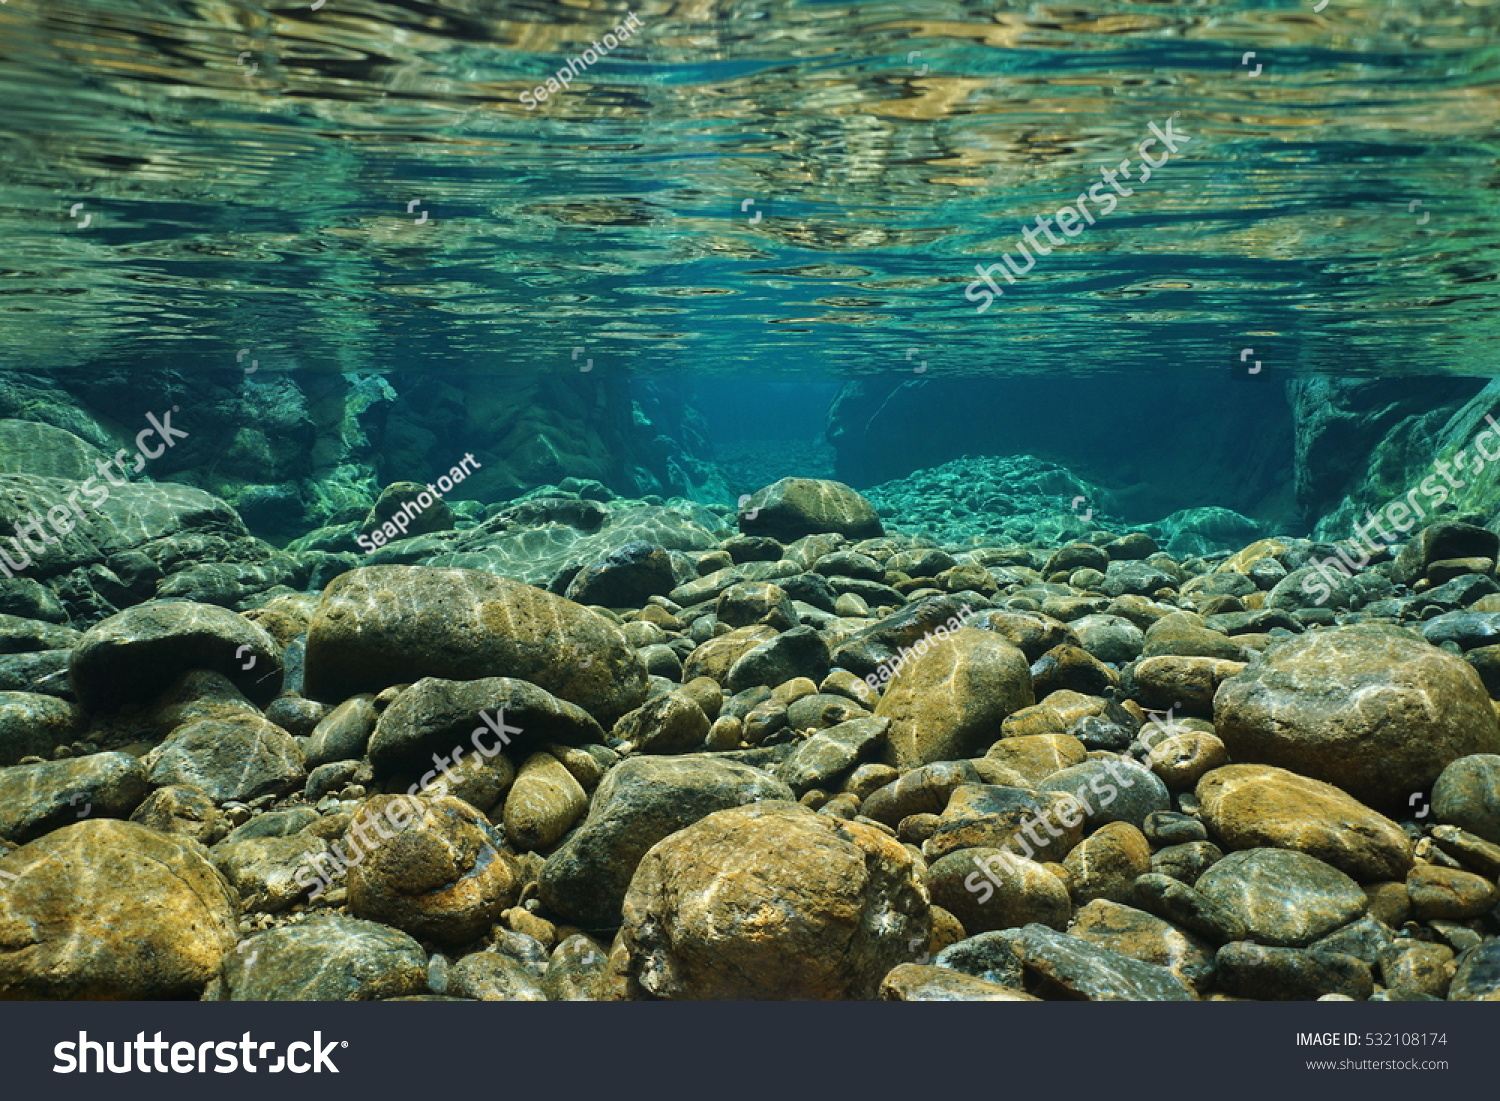 Rocks underwater on riverbed with clear freshwater, Dumbea river, Grande Terre, New Caledonia #532108174